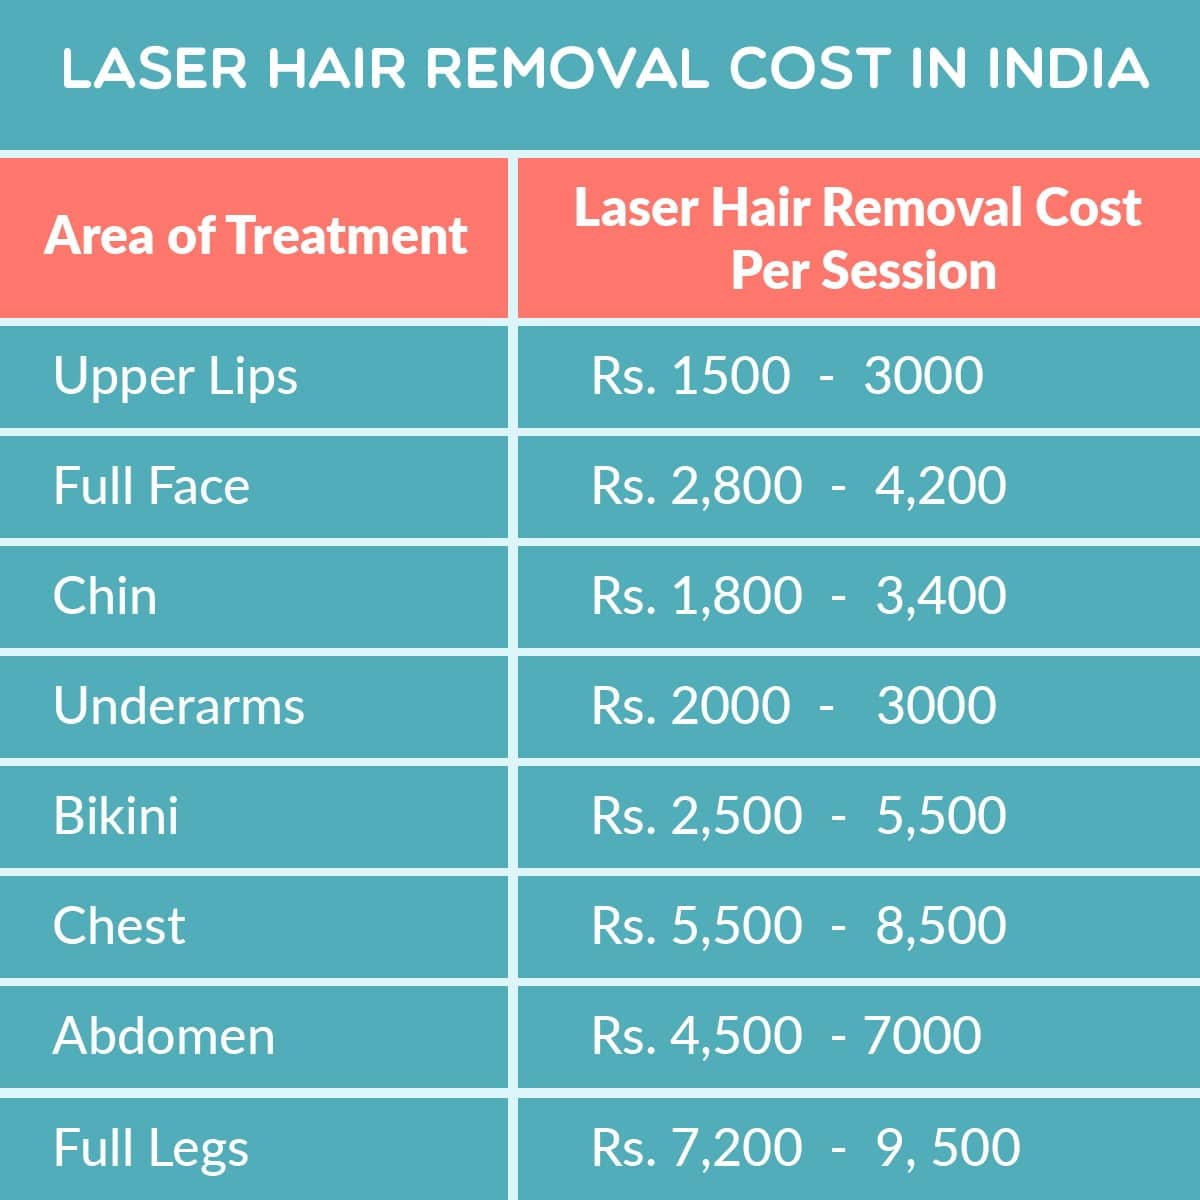 laser hair removal cost in india - Laser Hair Removal Cost in India